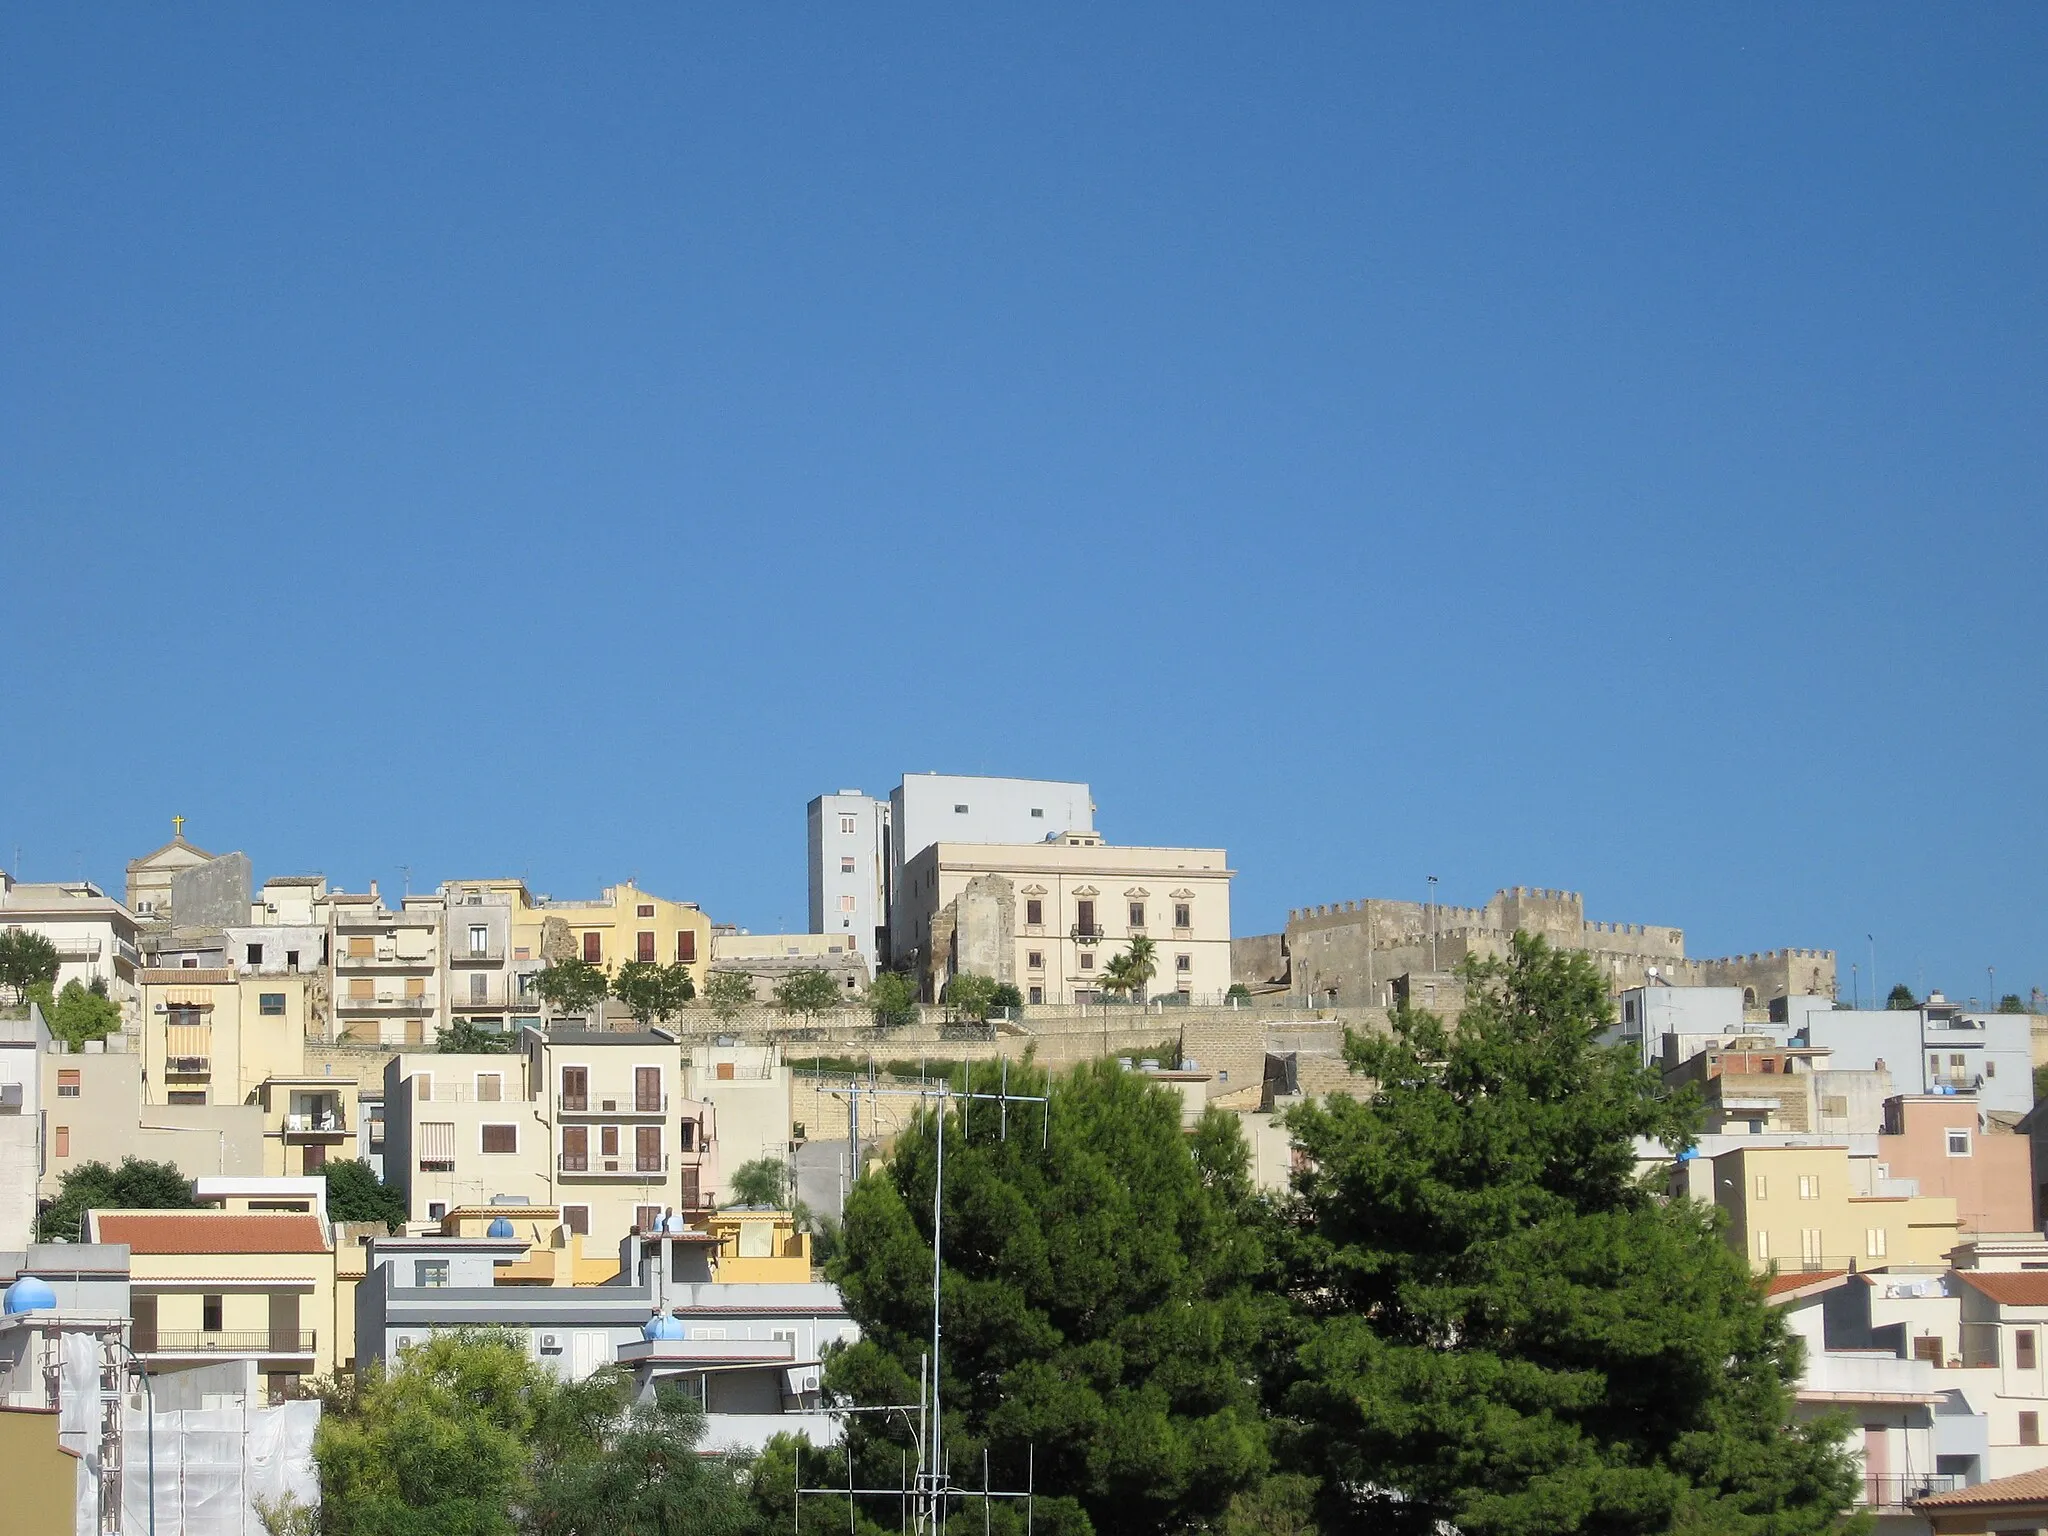 Photo showing: View of the town Partanna